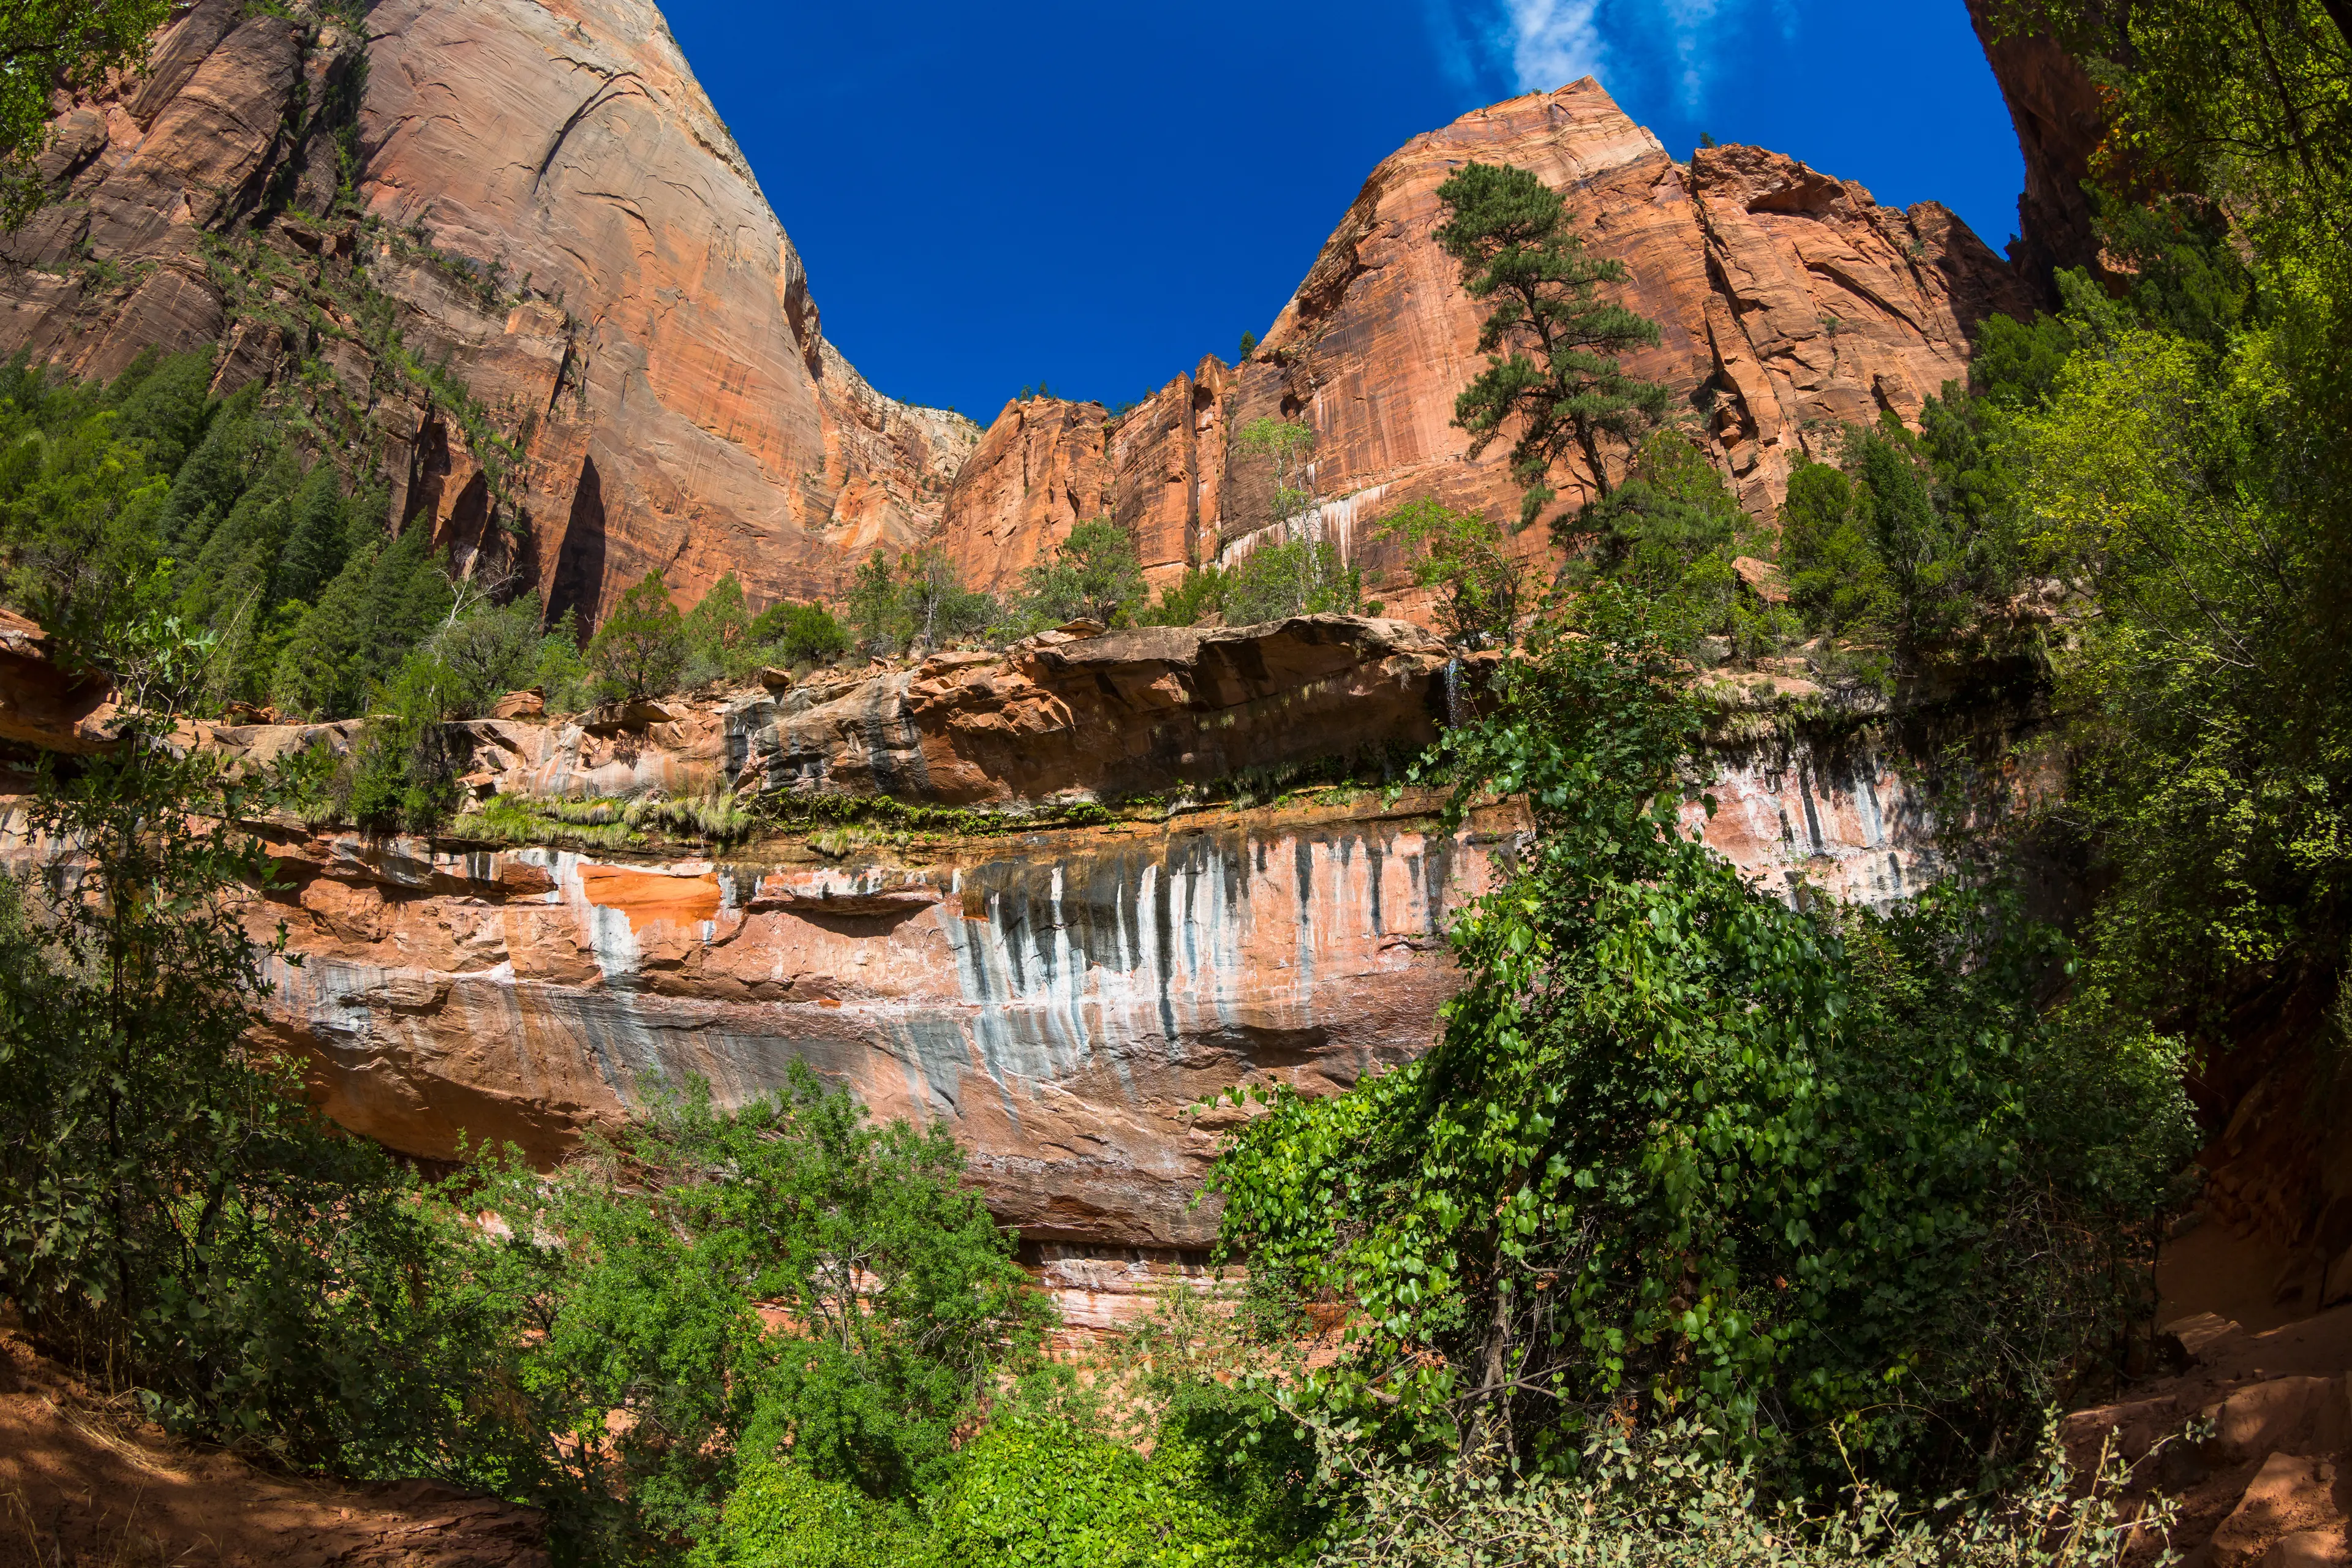 1-Day Local's Guide: Sightseeing & Outdoor Activities in Zion, Utah